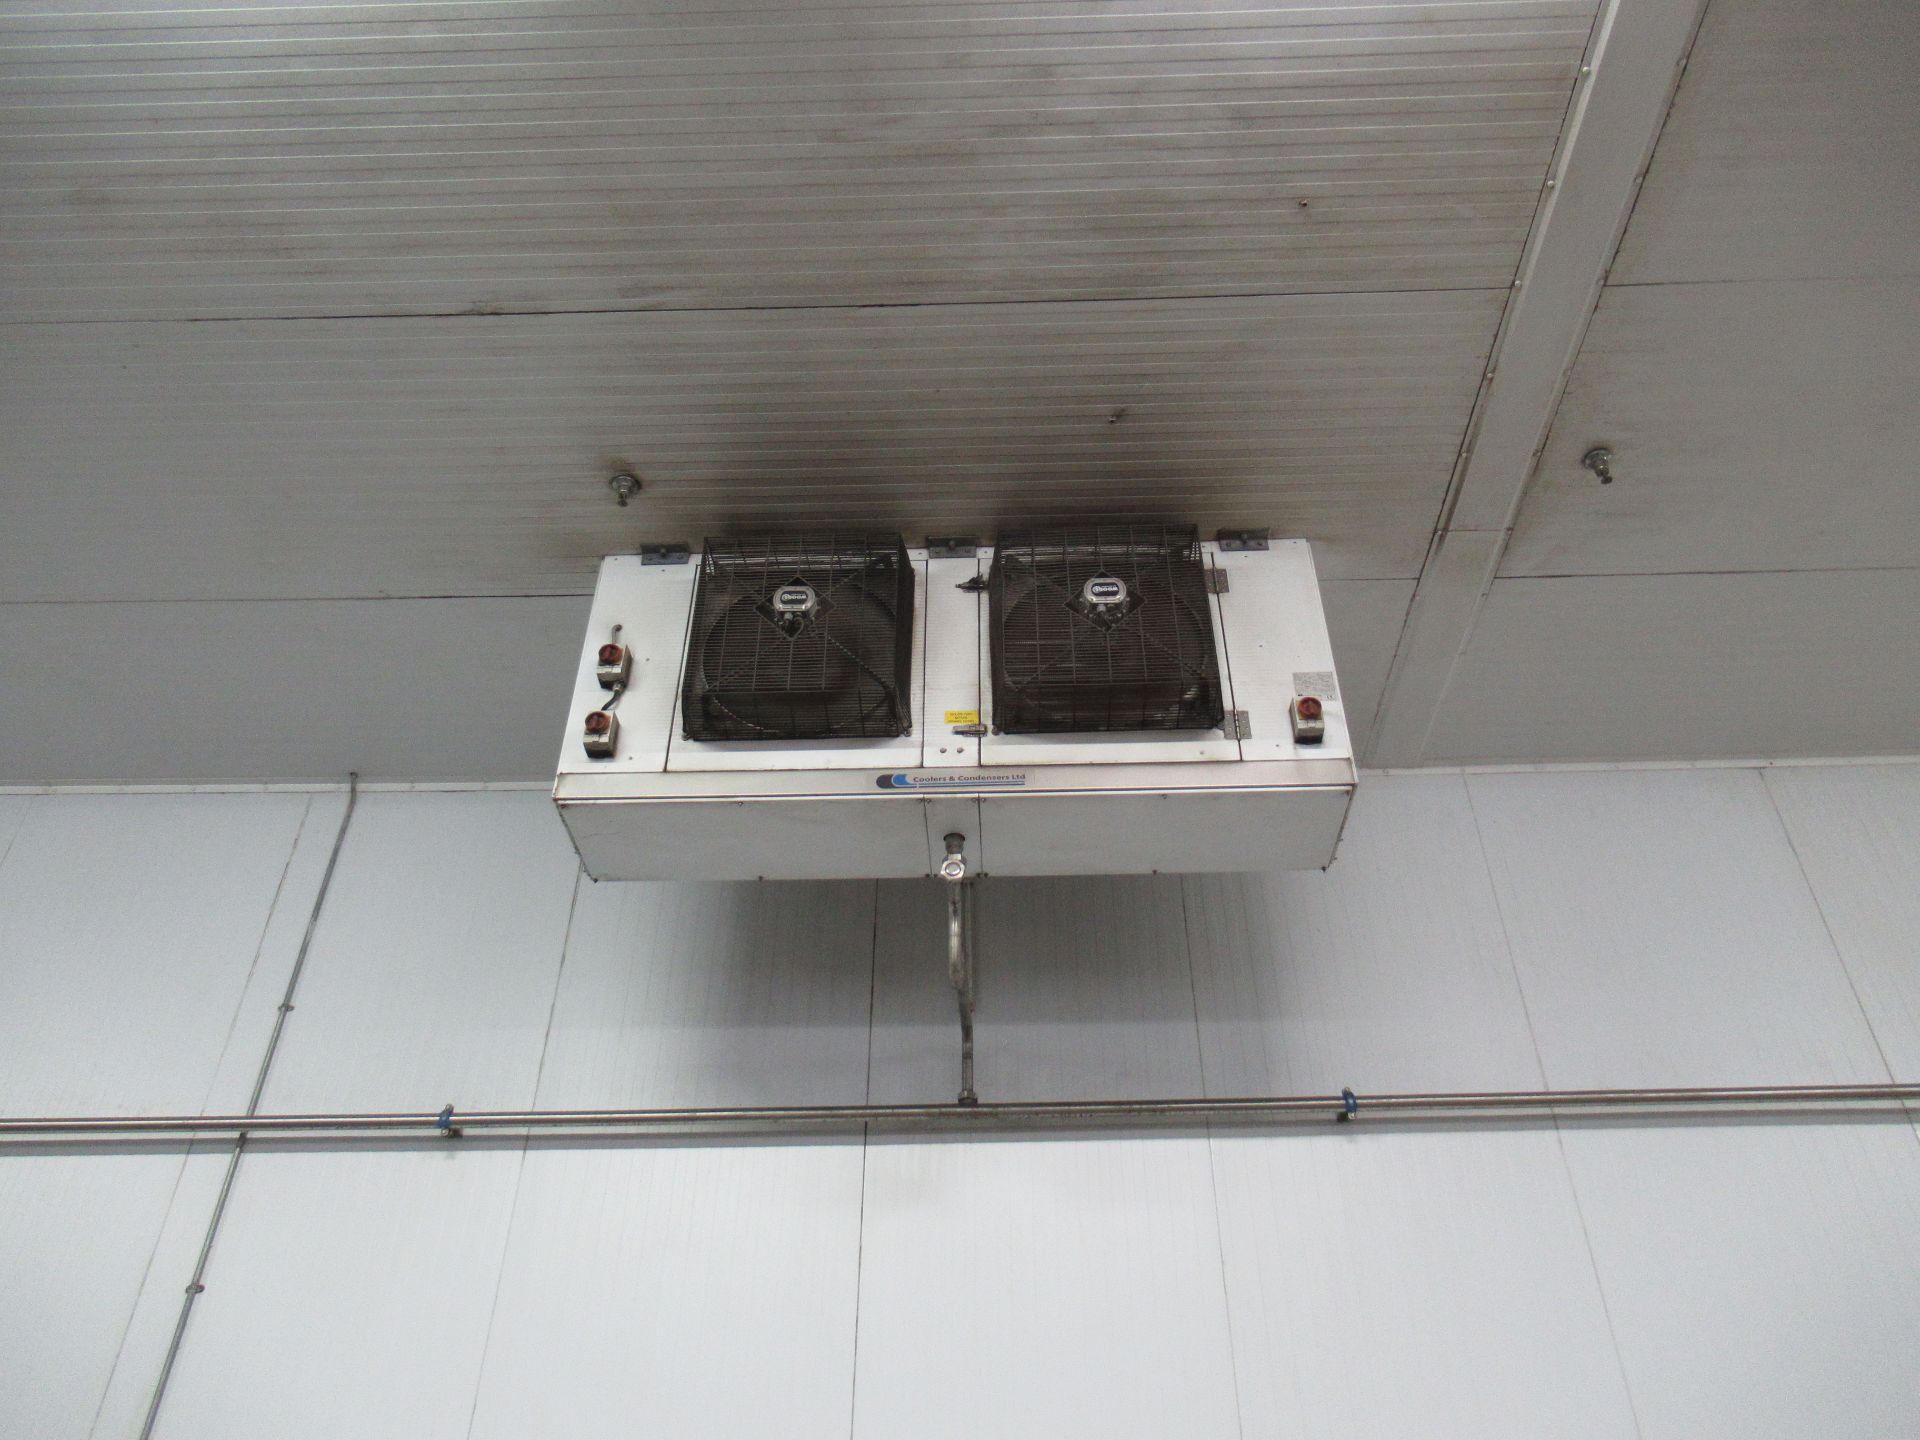 4 Coolers and Condensers cooling evaporators, 2 fan acceptance of the highest bid on this lot is - Image 4 of 6